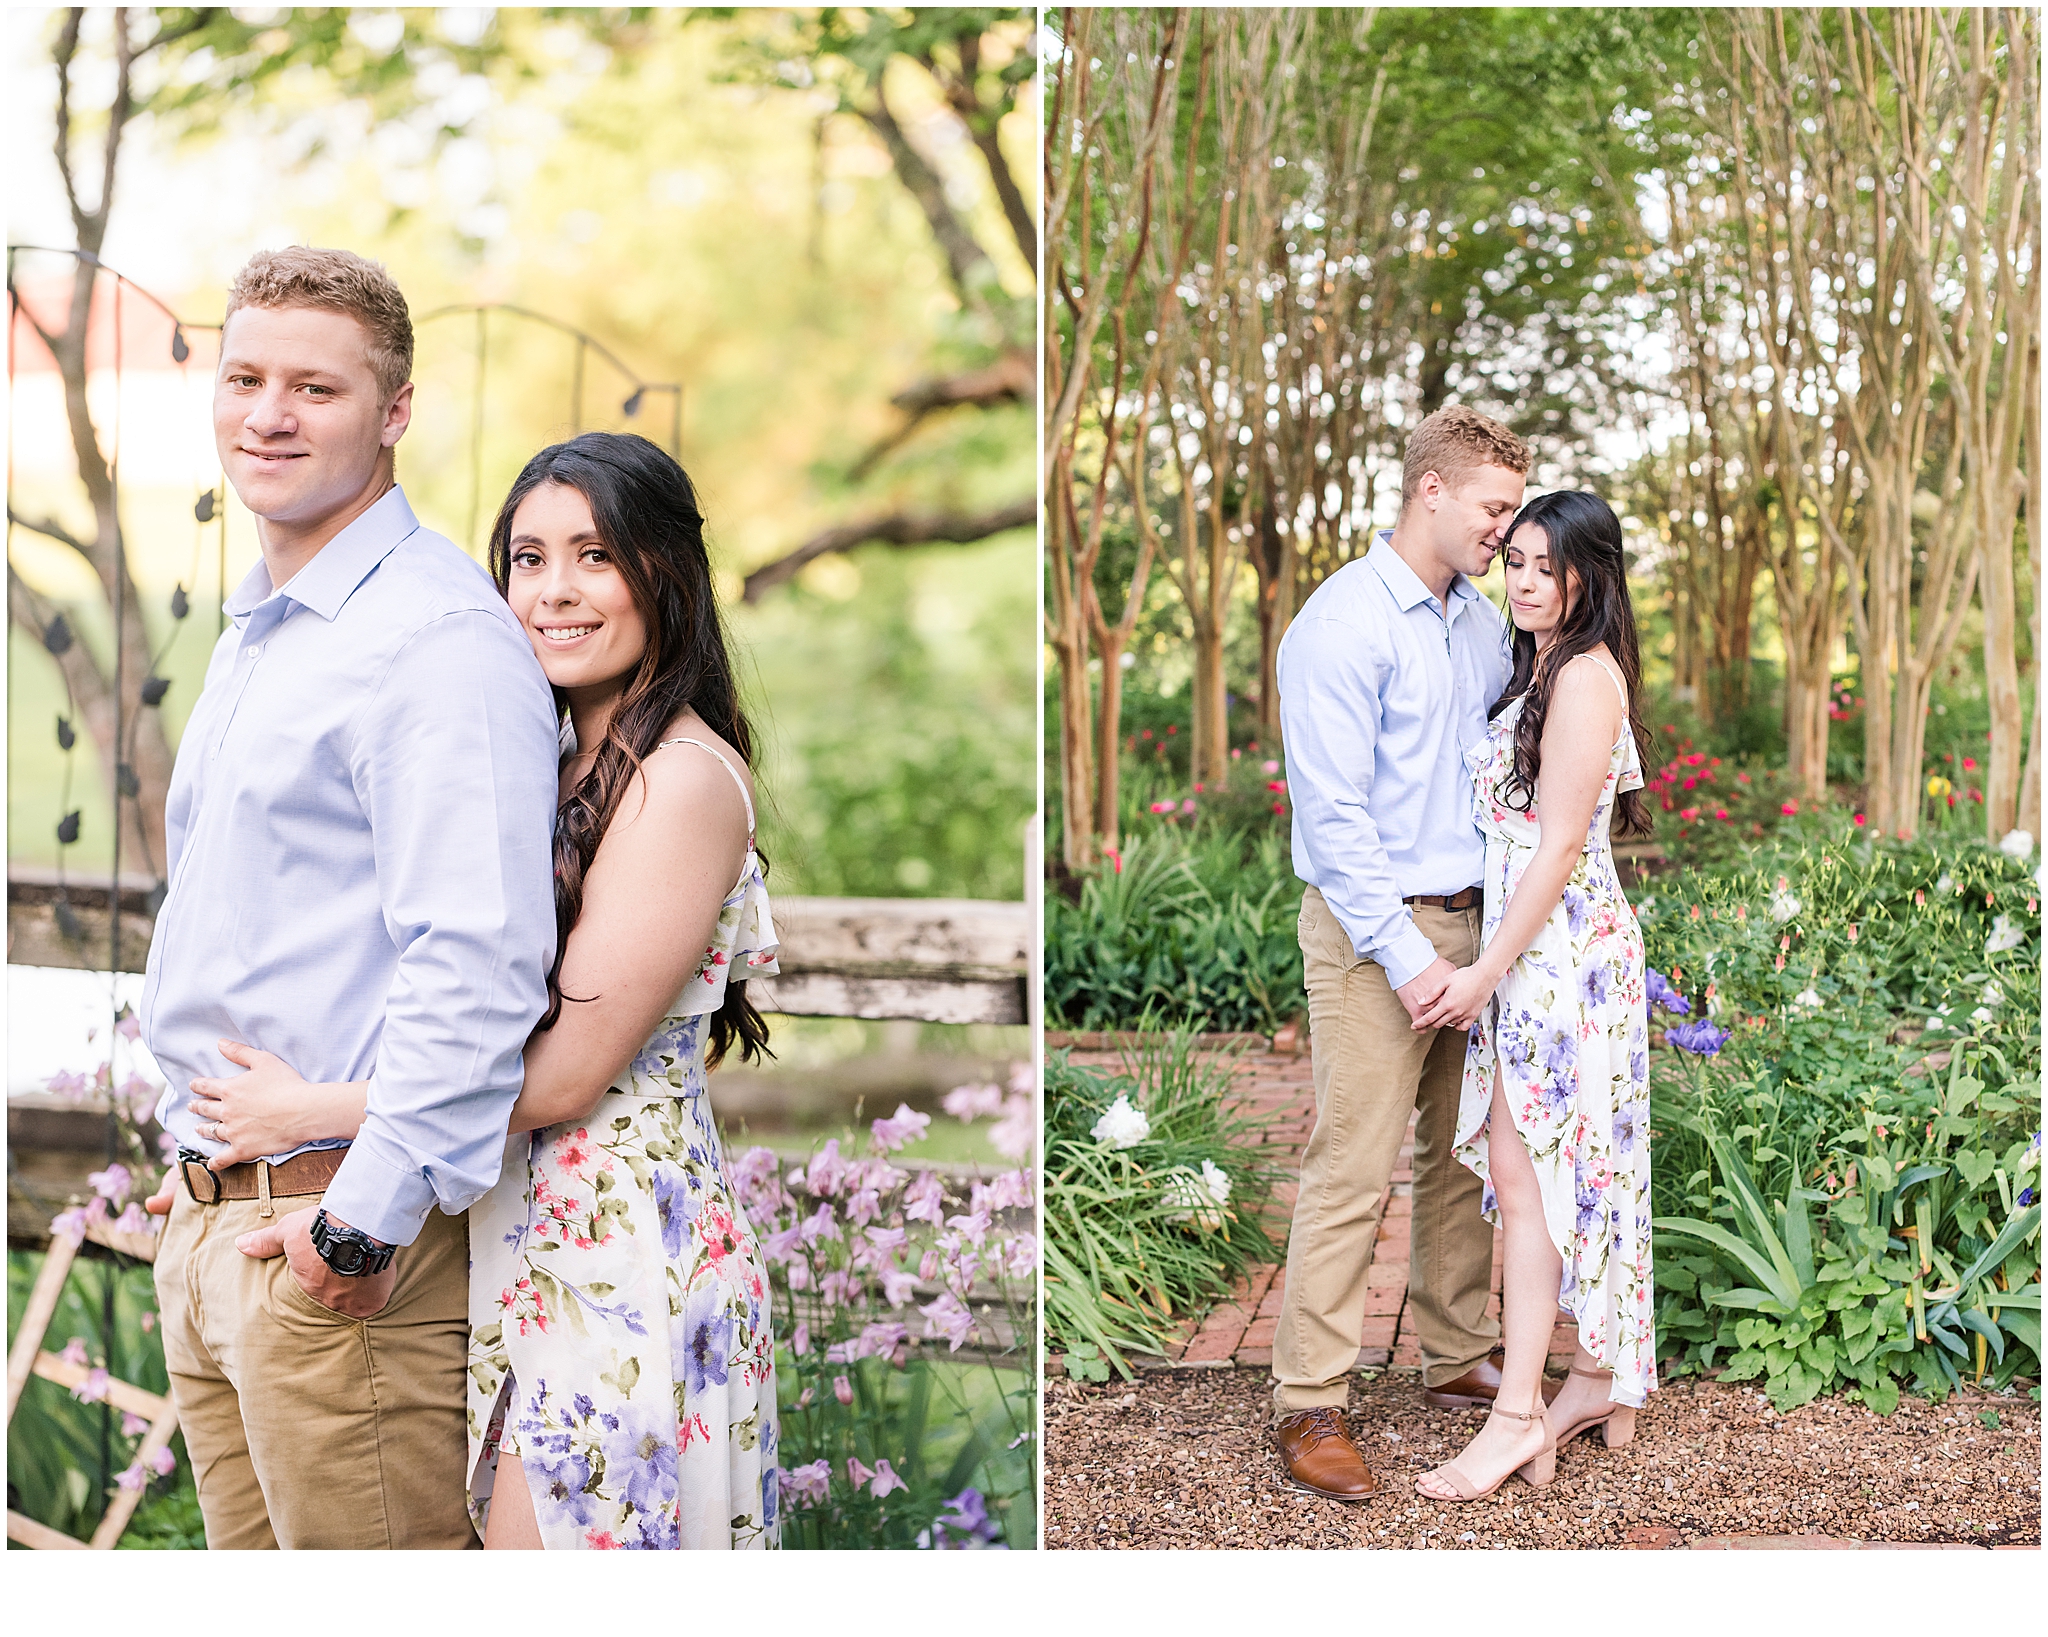 Couple in a garden during their garden engagement session. Neely Roberts Photography